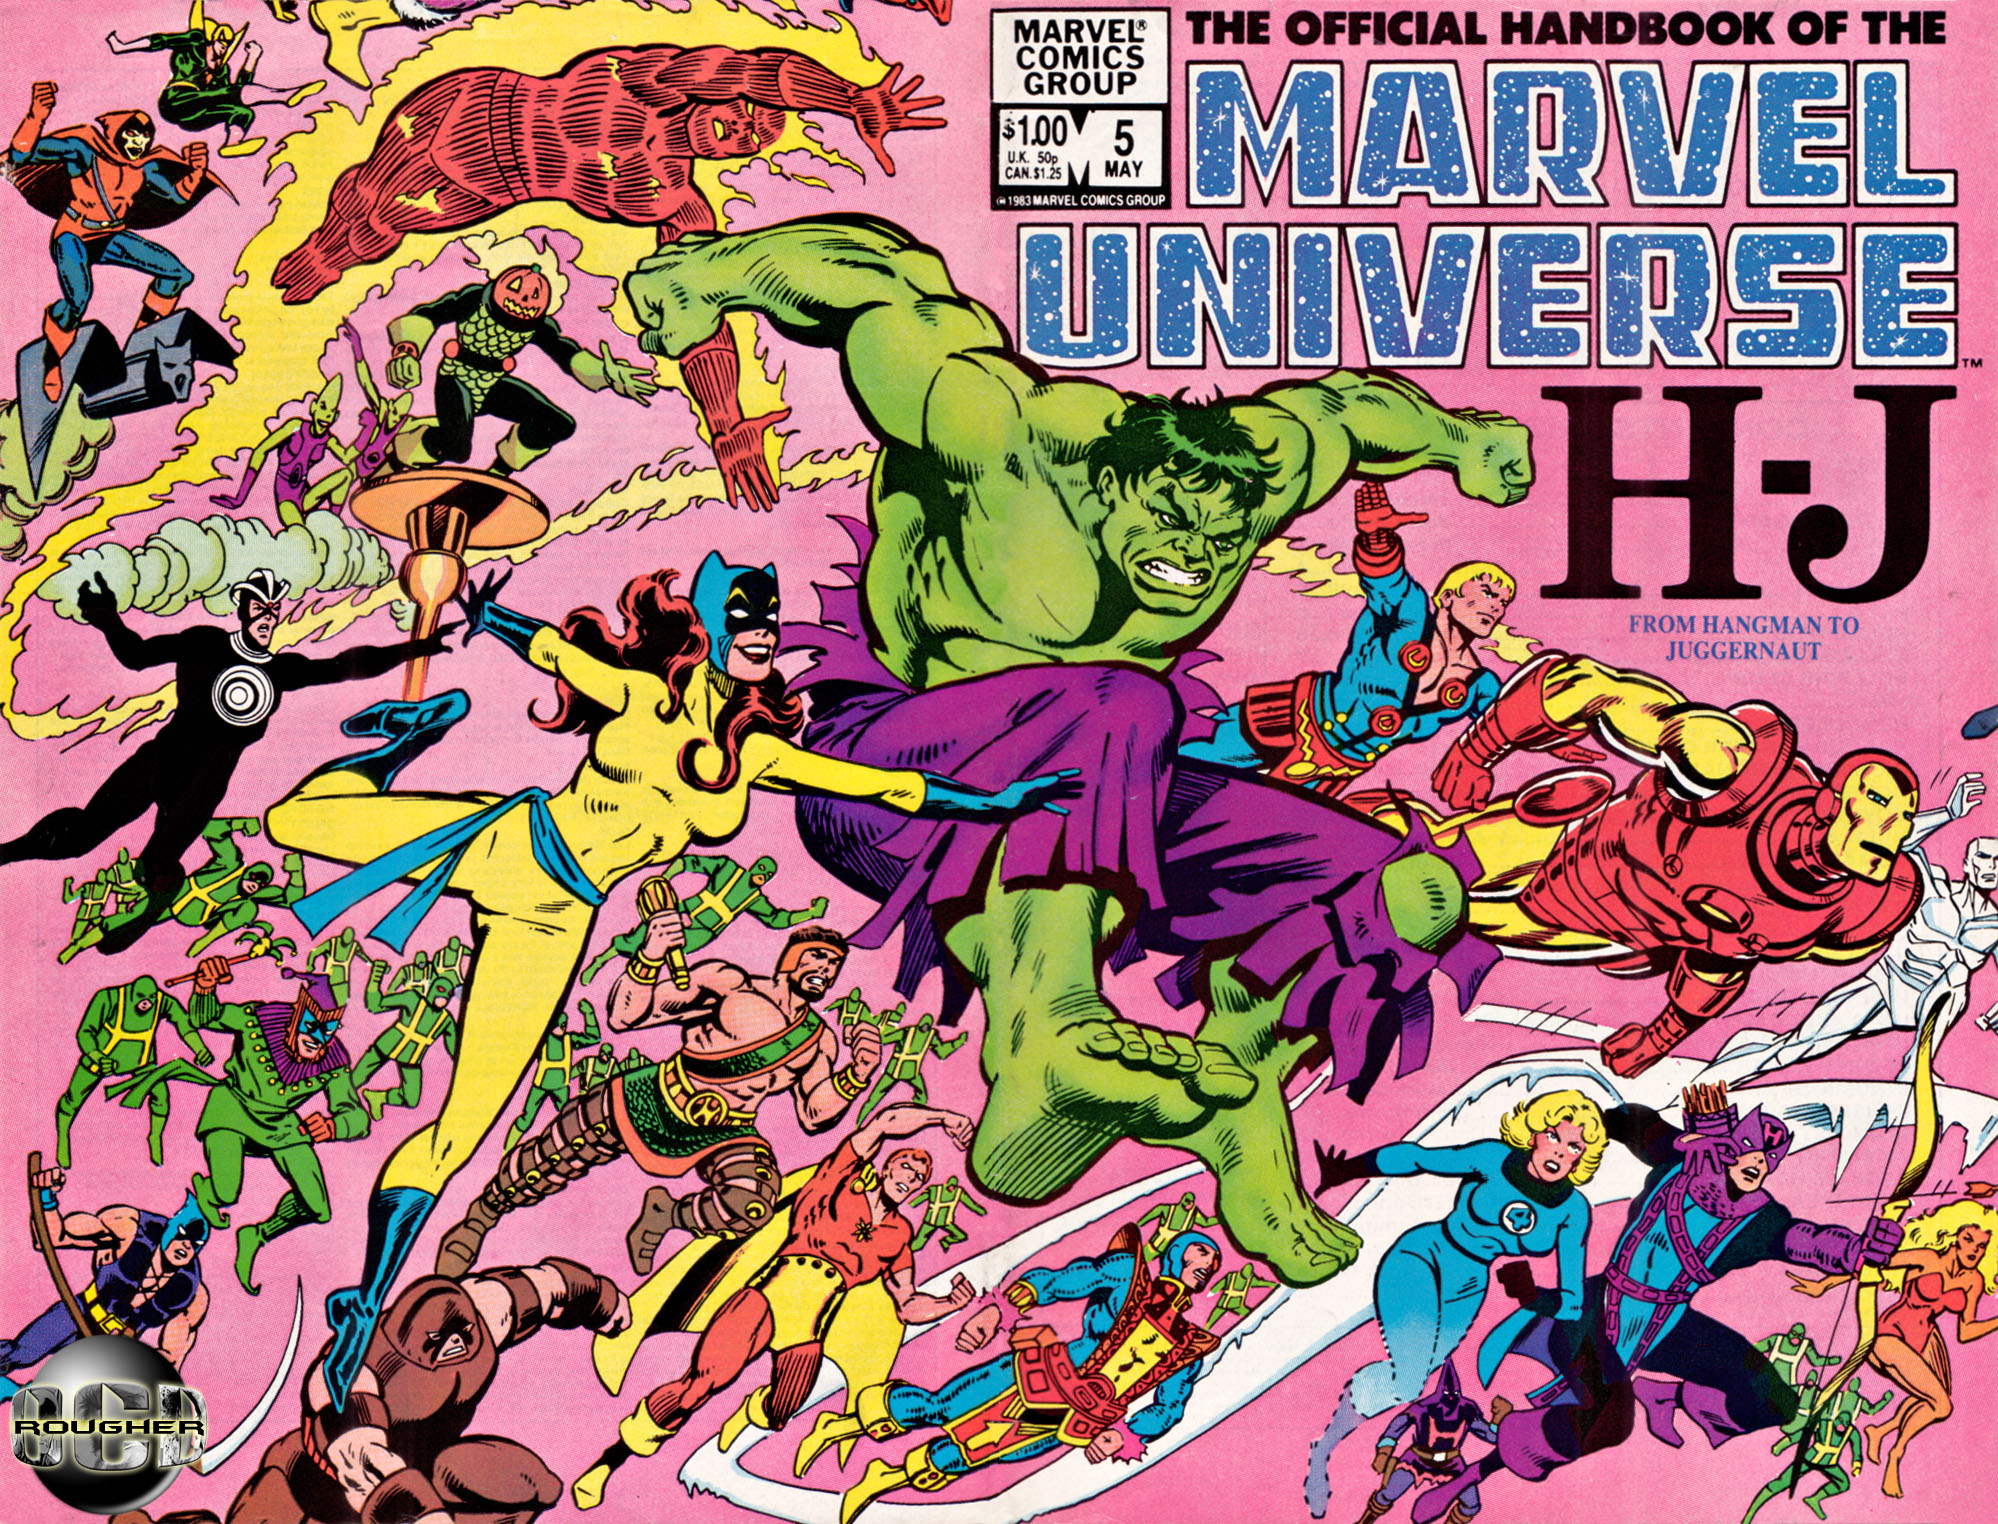 Read online The Official Handbook of the Marvel Universe comic -  Issue #5 - 1